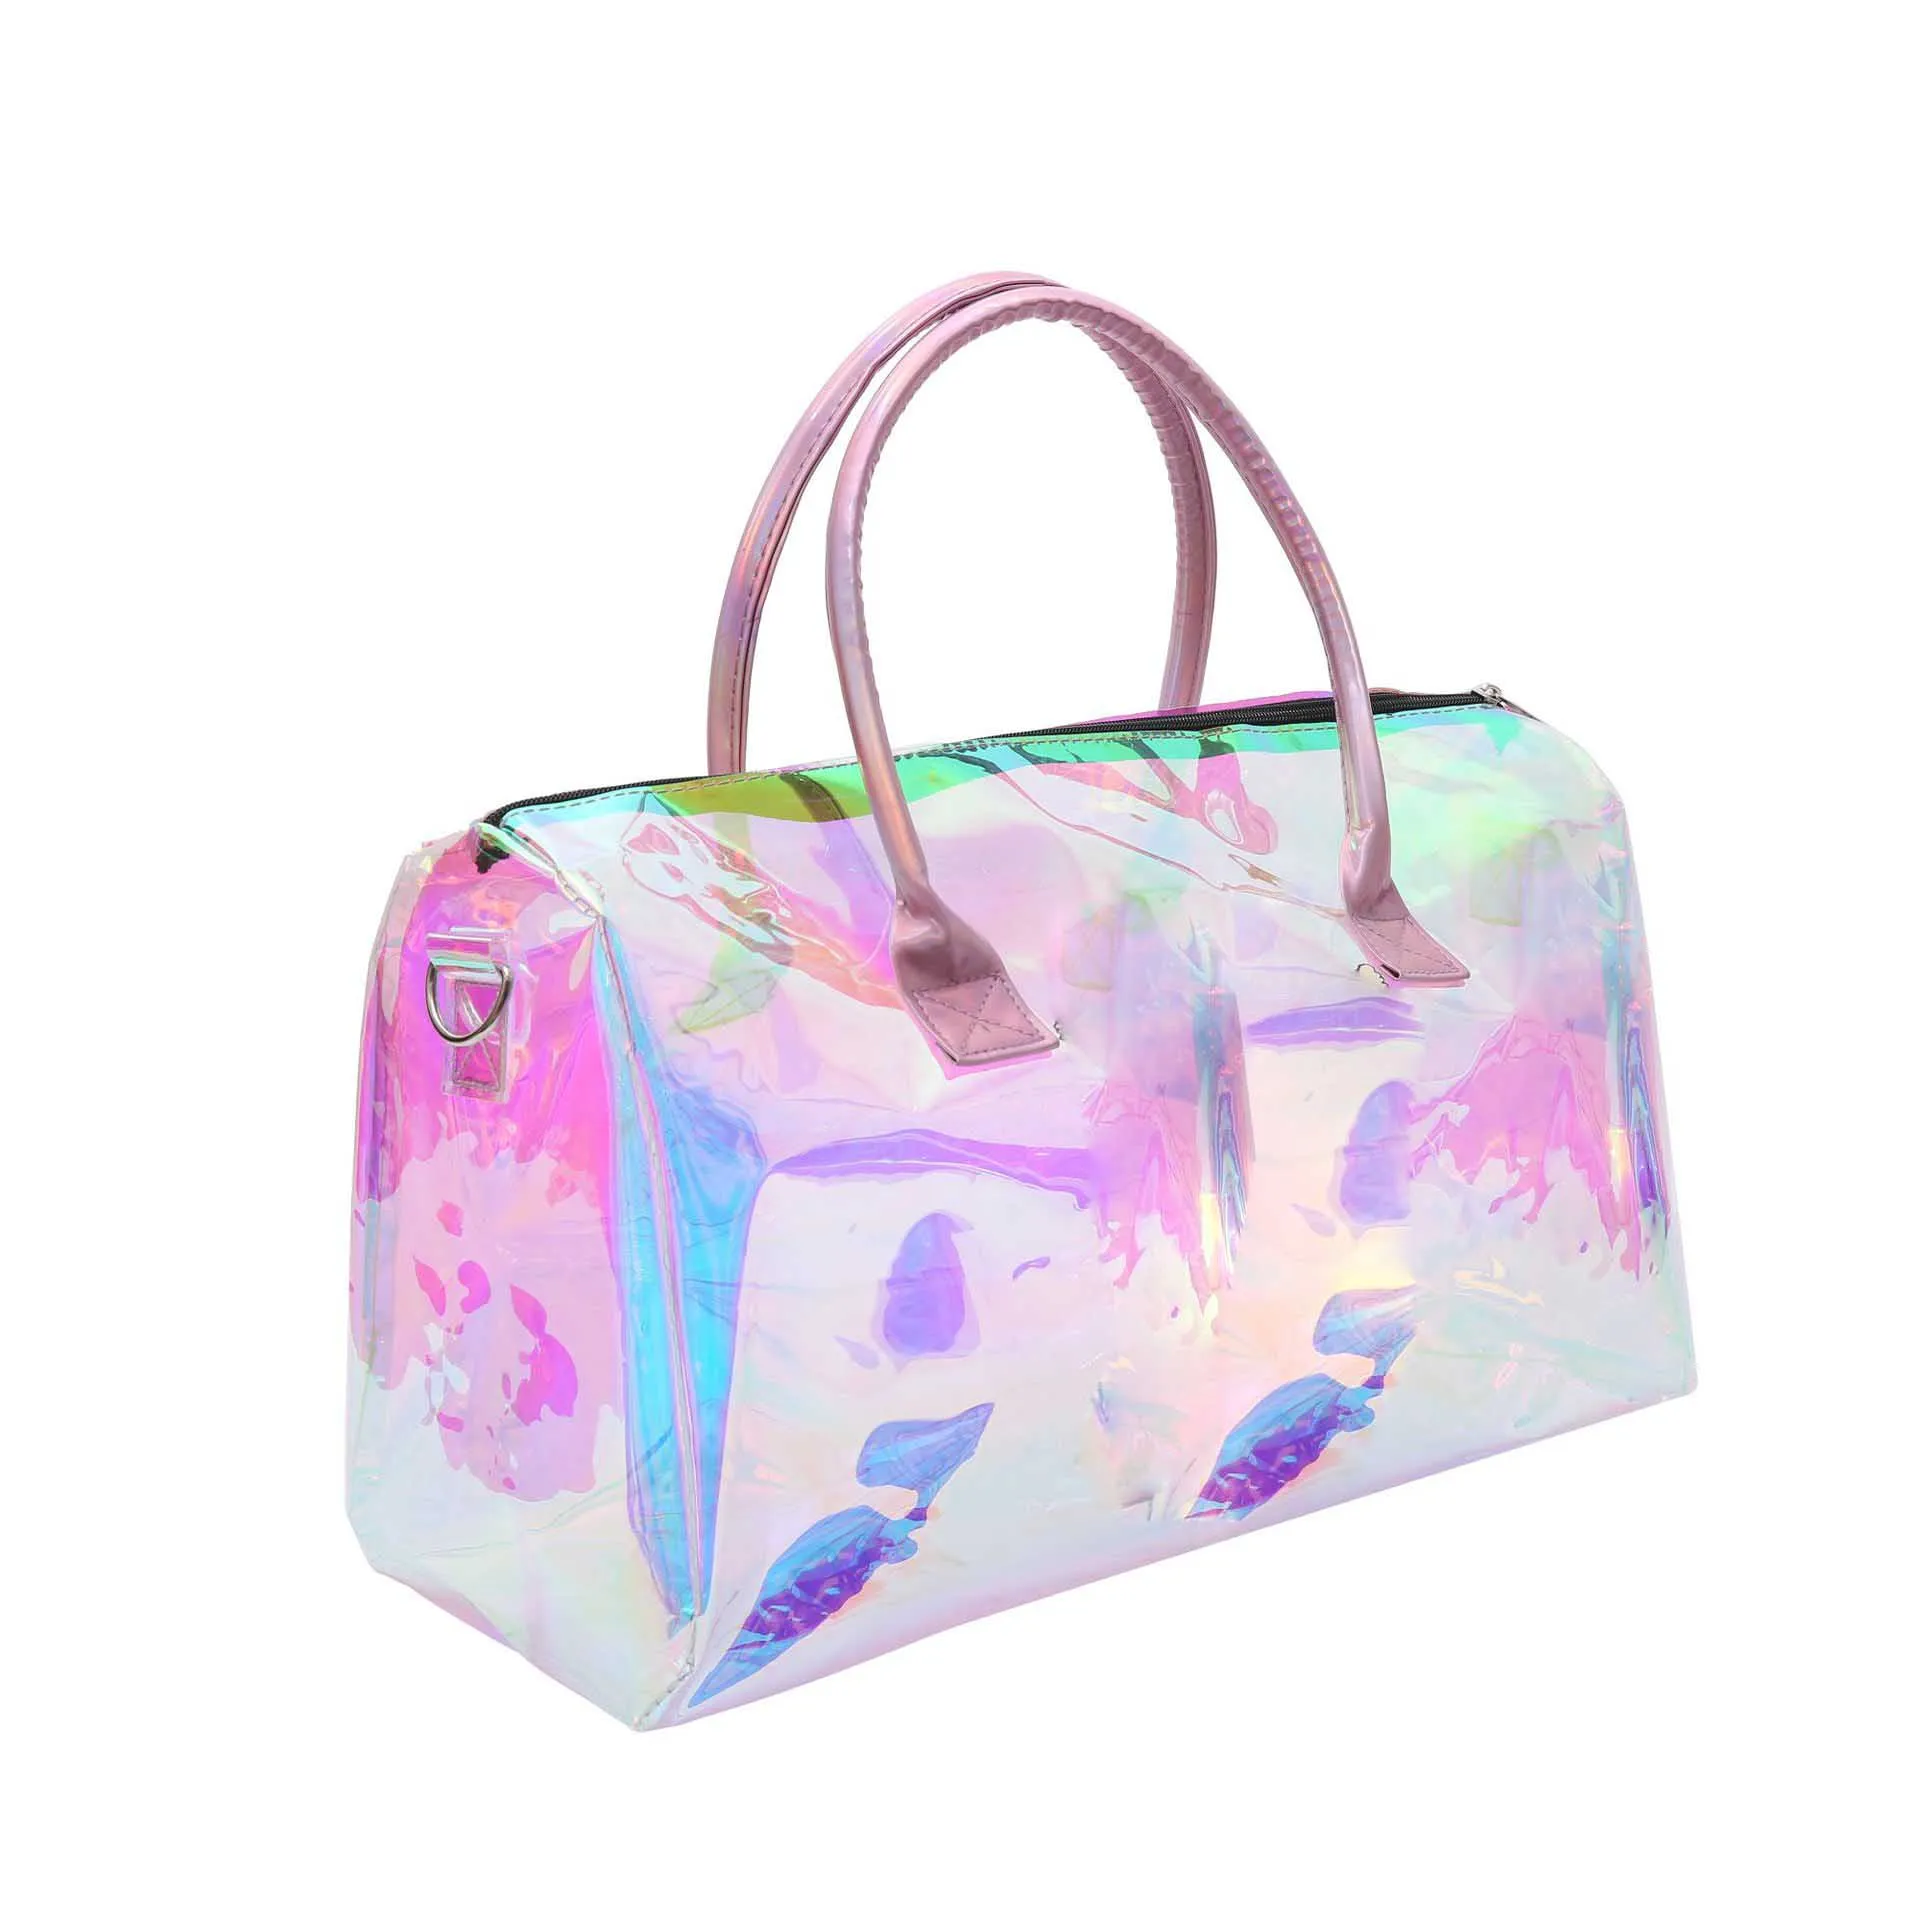 

Holographic Duffle Bag Ladies Outdoor Clear Waterproof Pvc Travel Bag Custom Colorful Transparent Gym Bag, As photos